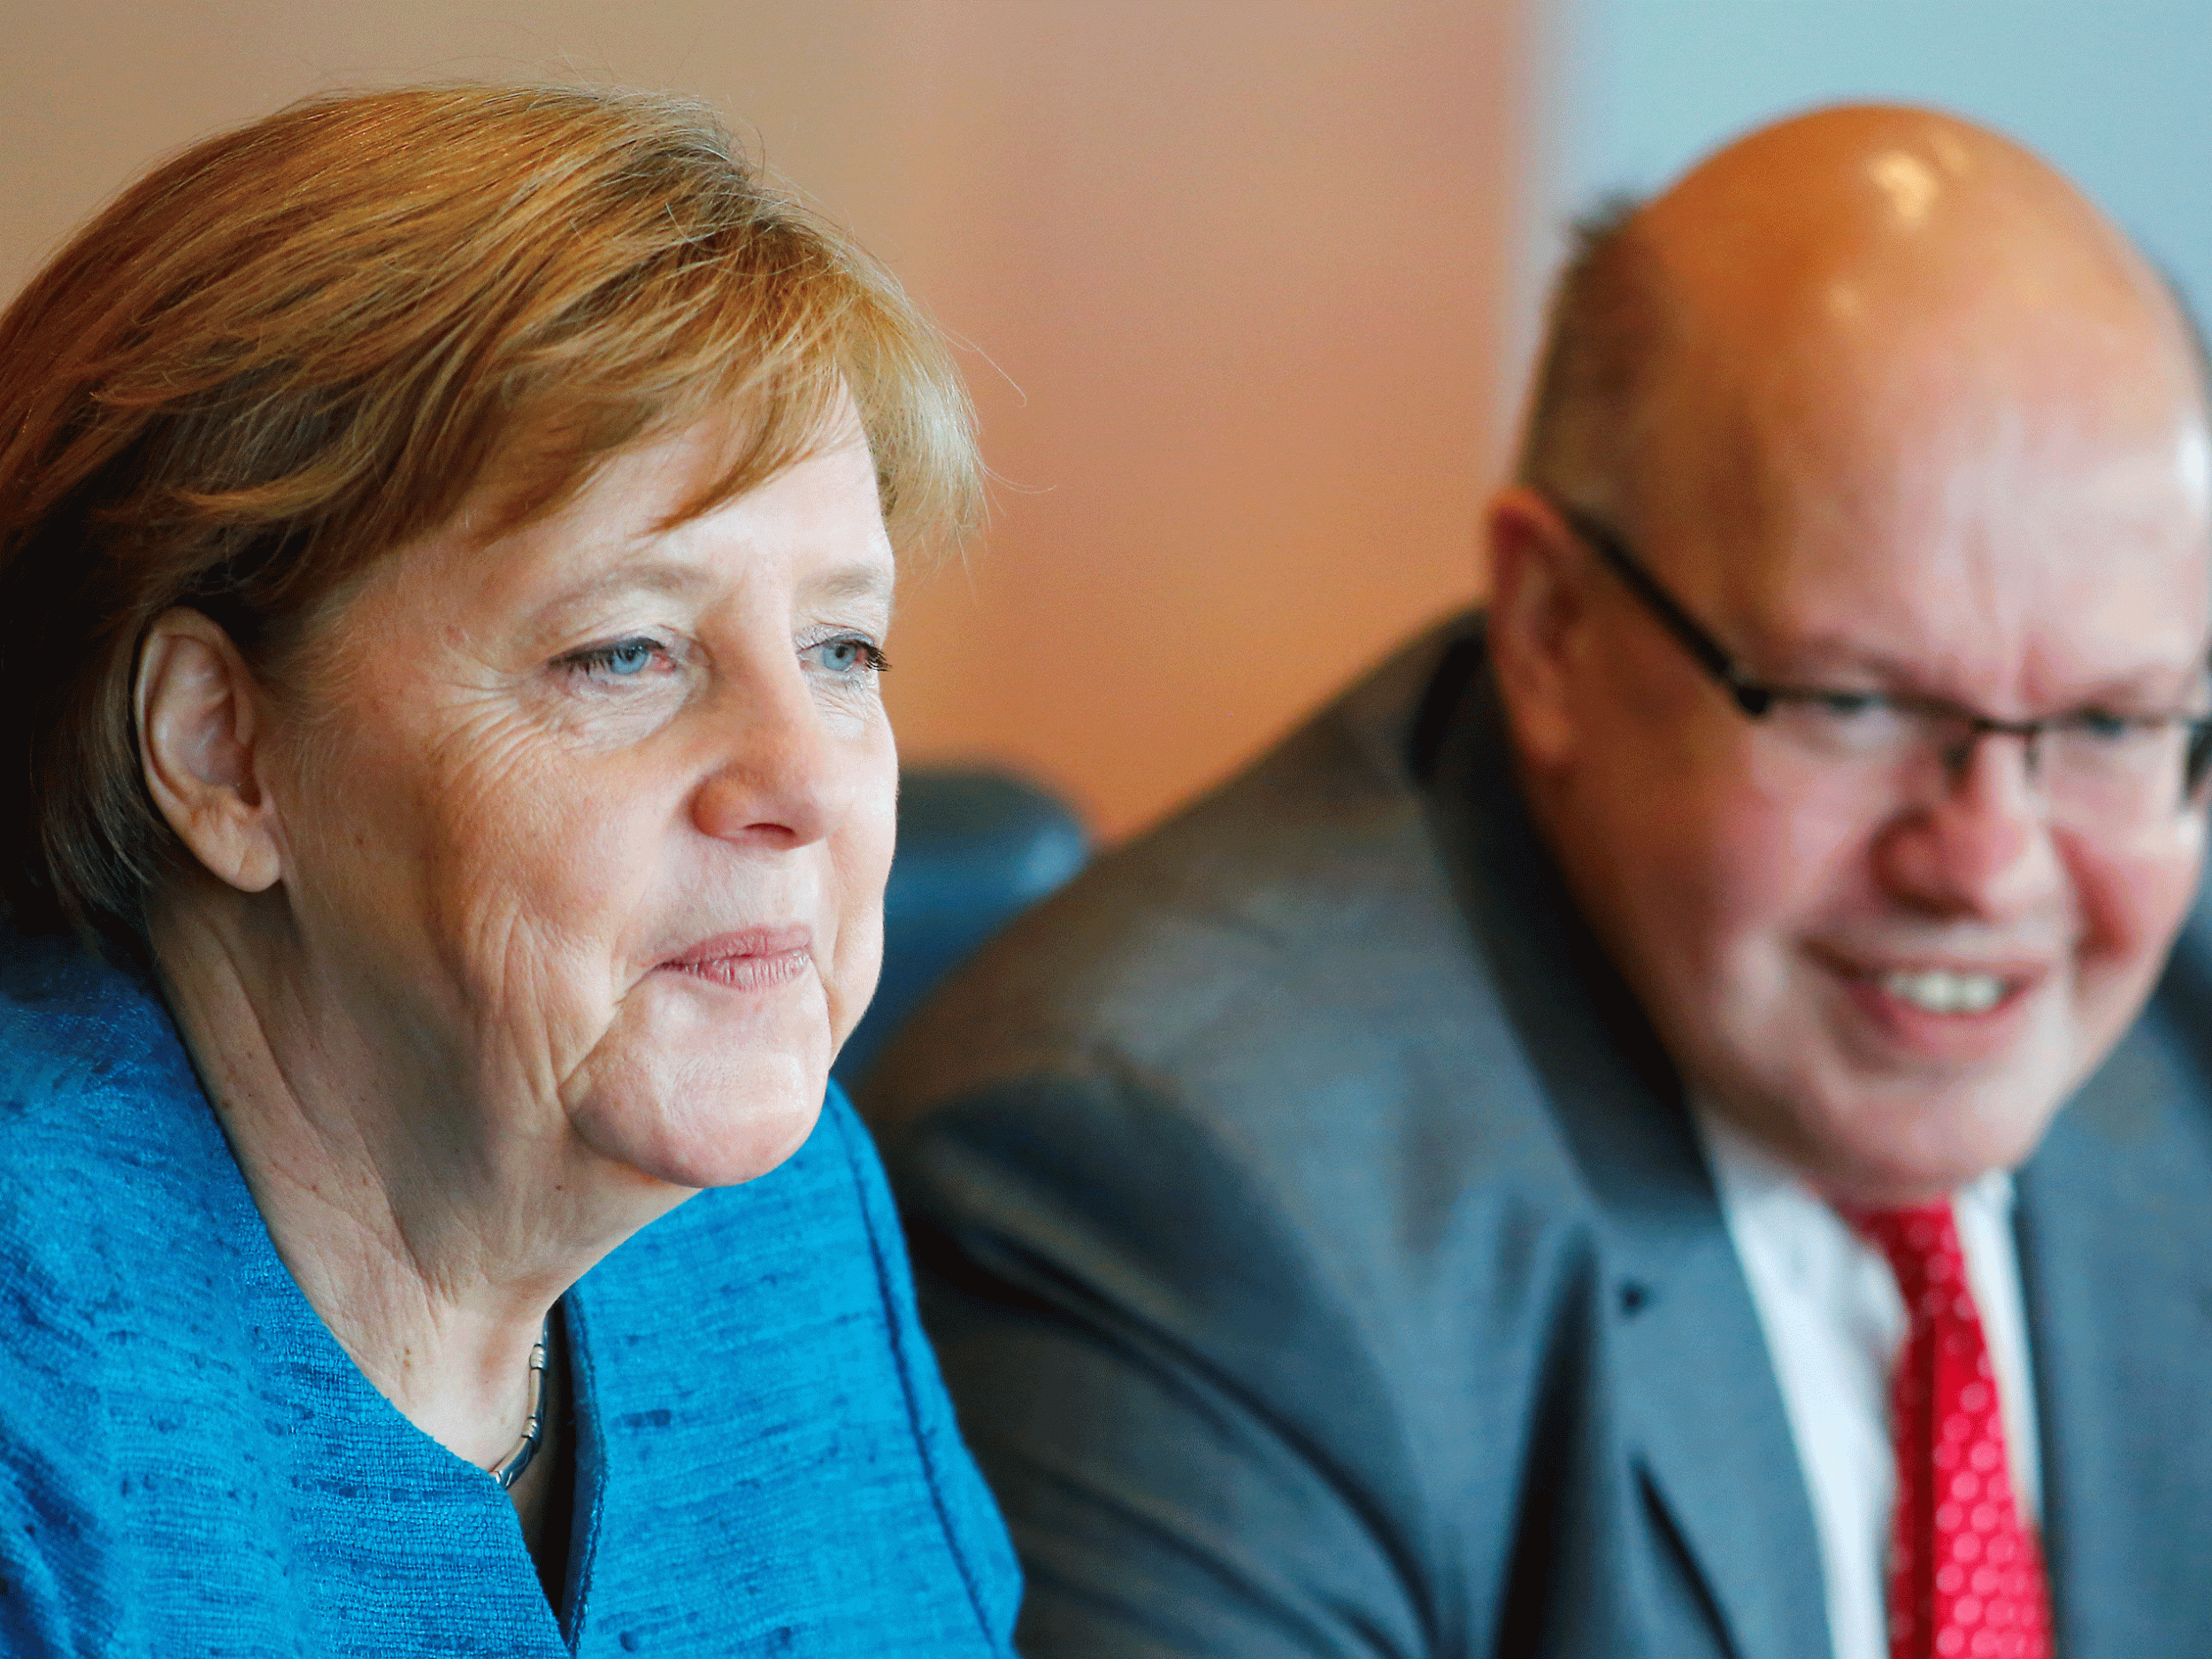 Brexit will be a win-win for the lawyers but not the UK, Angela Merkel's chief of staff Peter Altmaier says